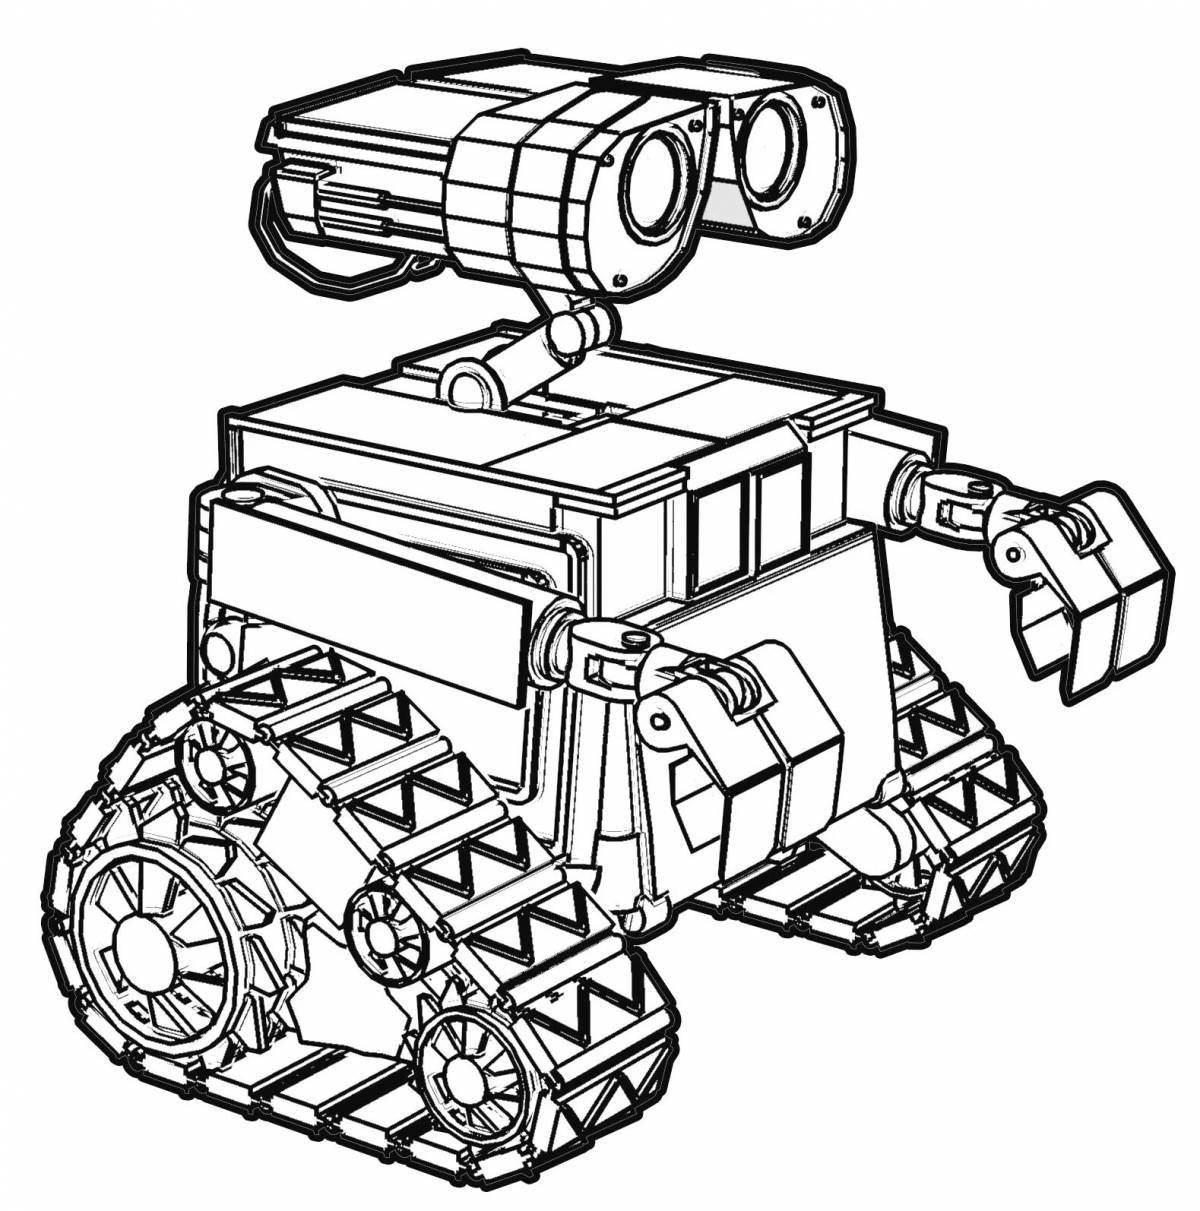 Glimmering Robot Tank coloring page